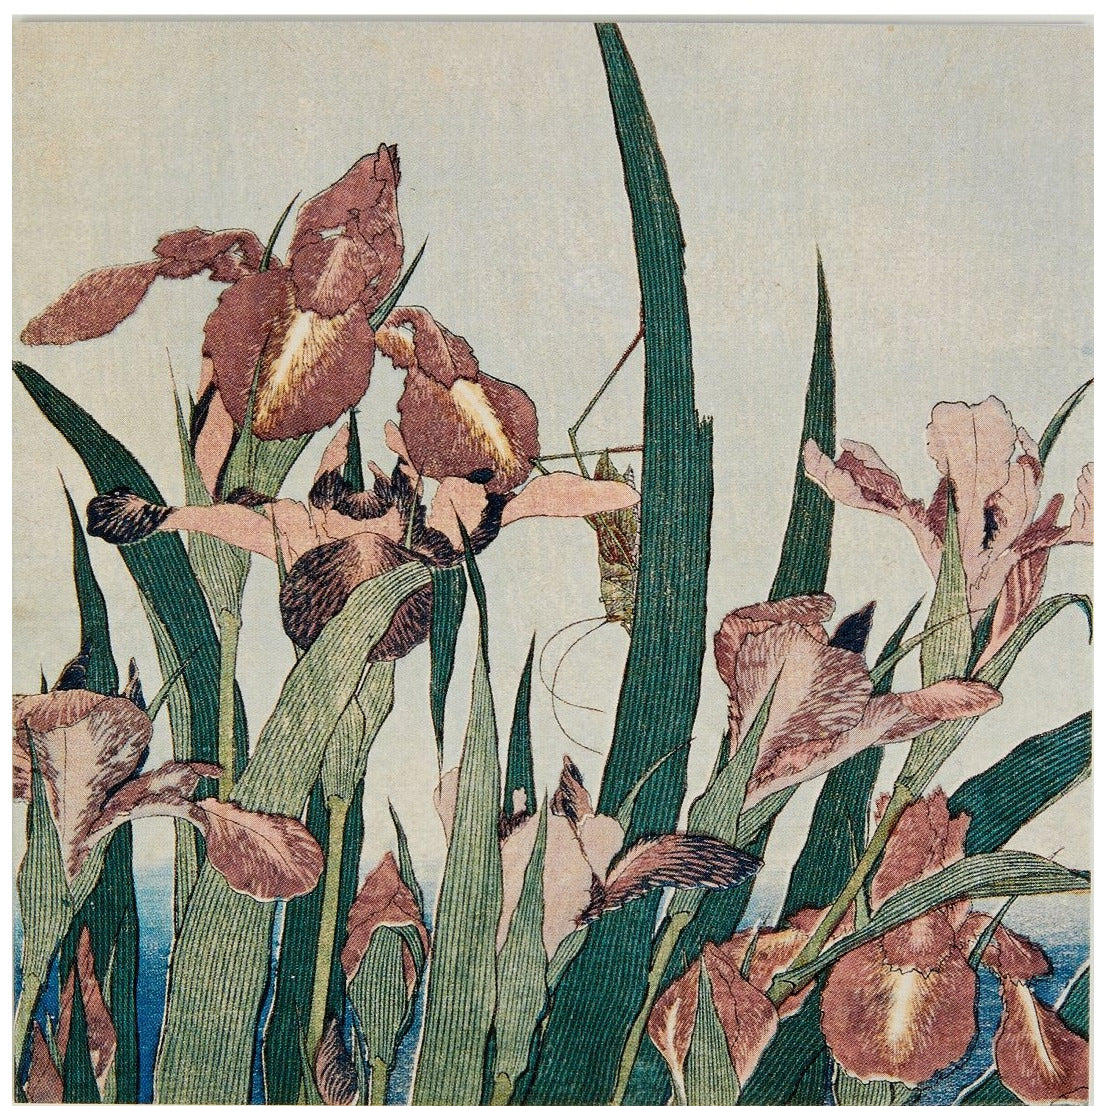 Notecard - detail from Irises and grasshopper by Katsushika Kokusai. From the collection of the Fitzwilliam Museum, brought to you by CuratingCambridge.co.uk